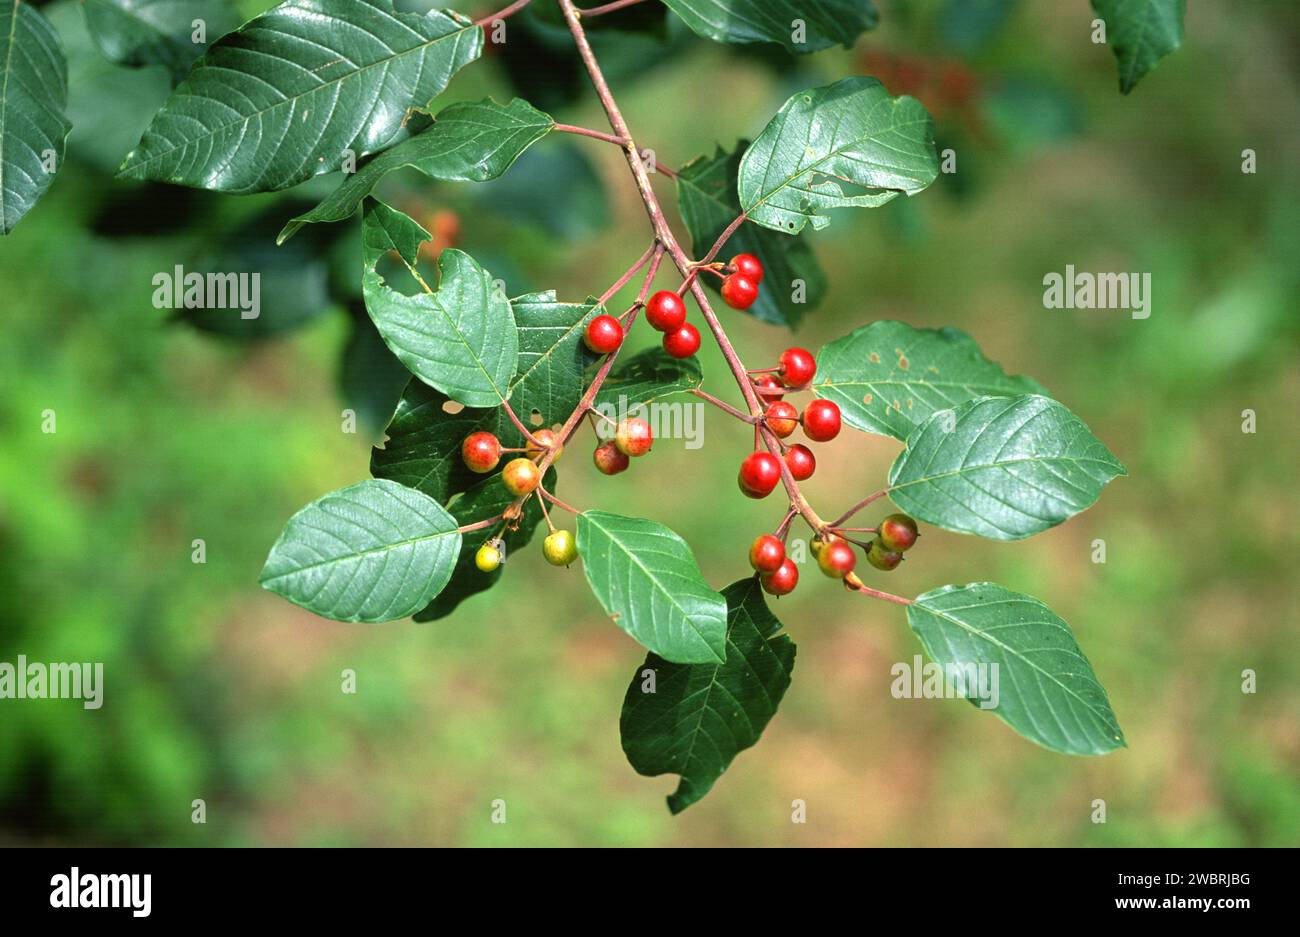 Alder buckthorn (Rhamnus frangula or Frangula alnus) is a deciduous shrub native to Europe, north Africa mountains and western Asia. This photo was ta Stock Photo